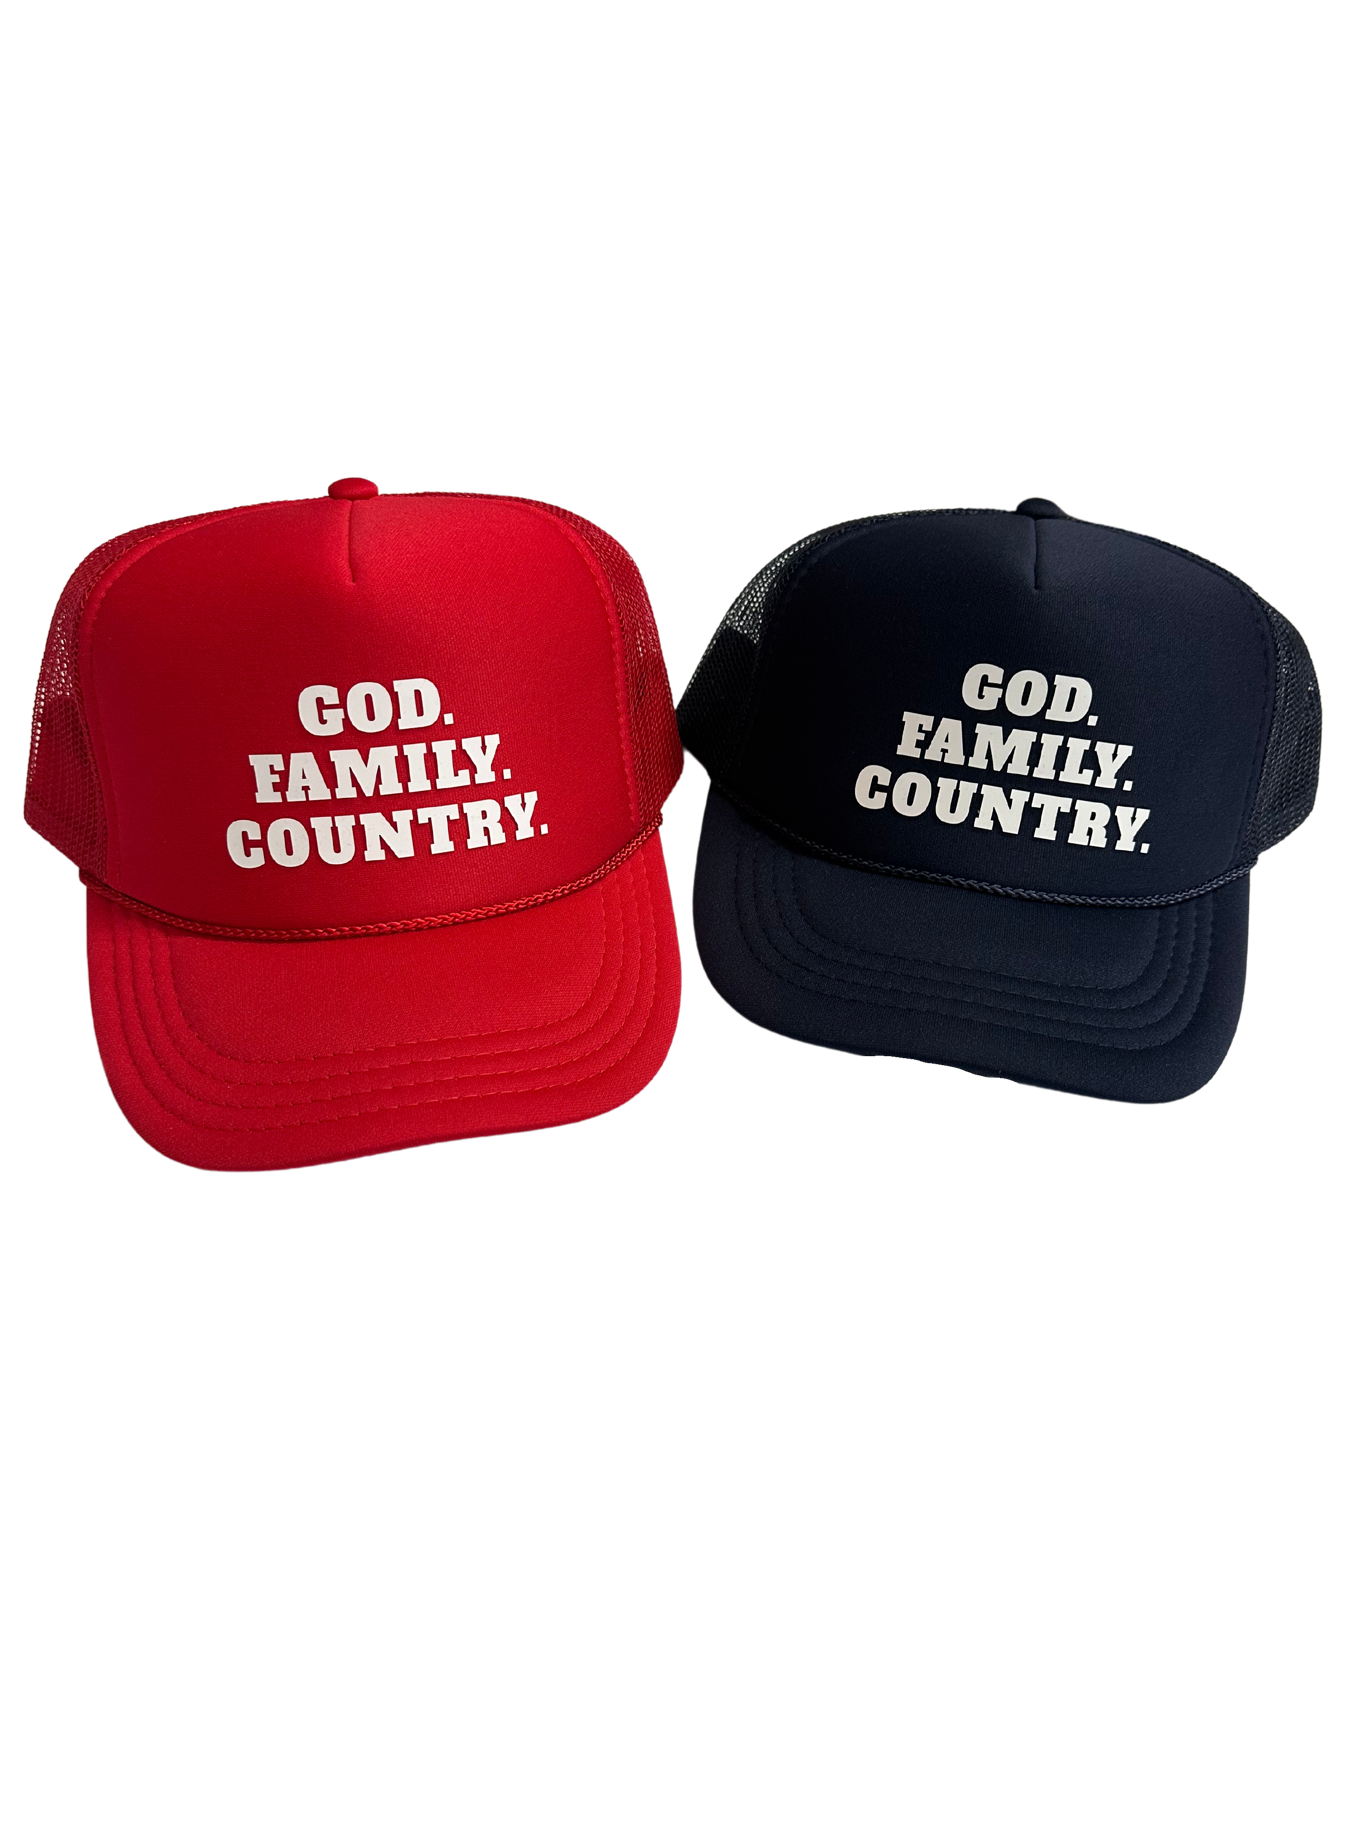 YOUTH God Family Country Trucker Hat